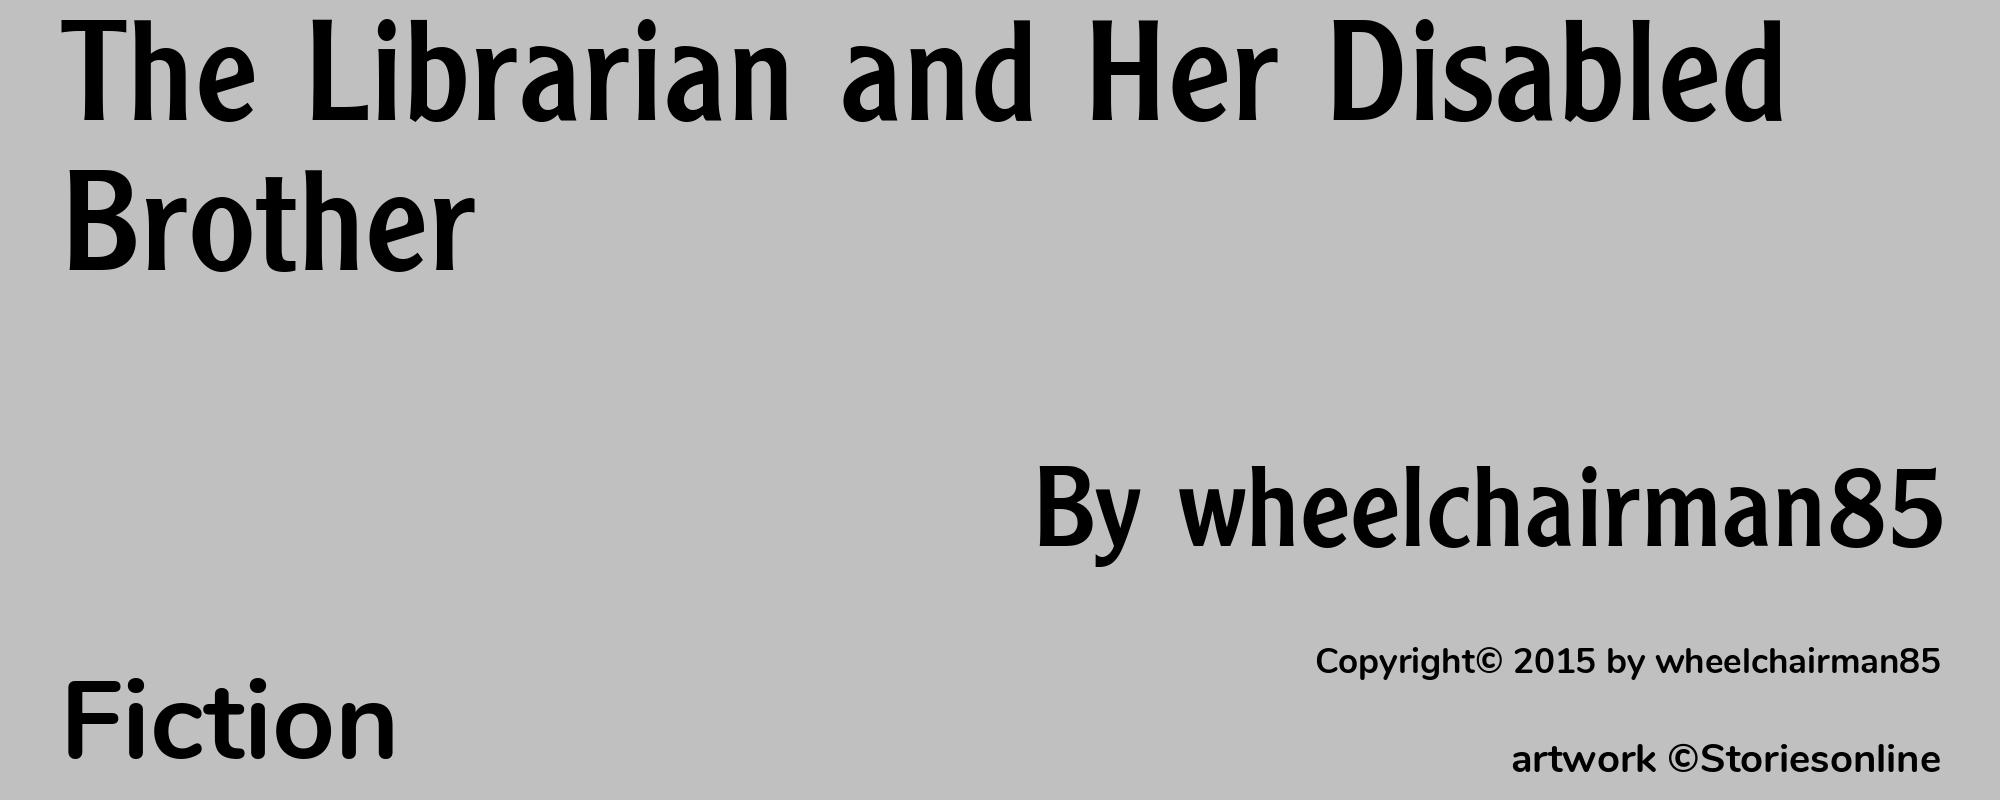 The Librarian and Her Disabled Brother - Cover